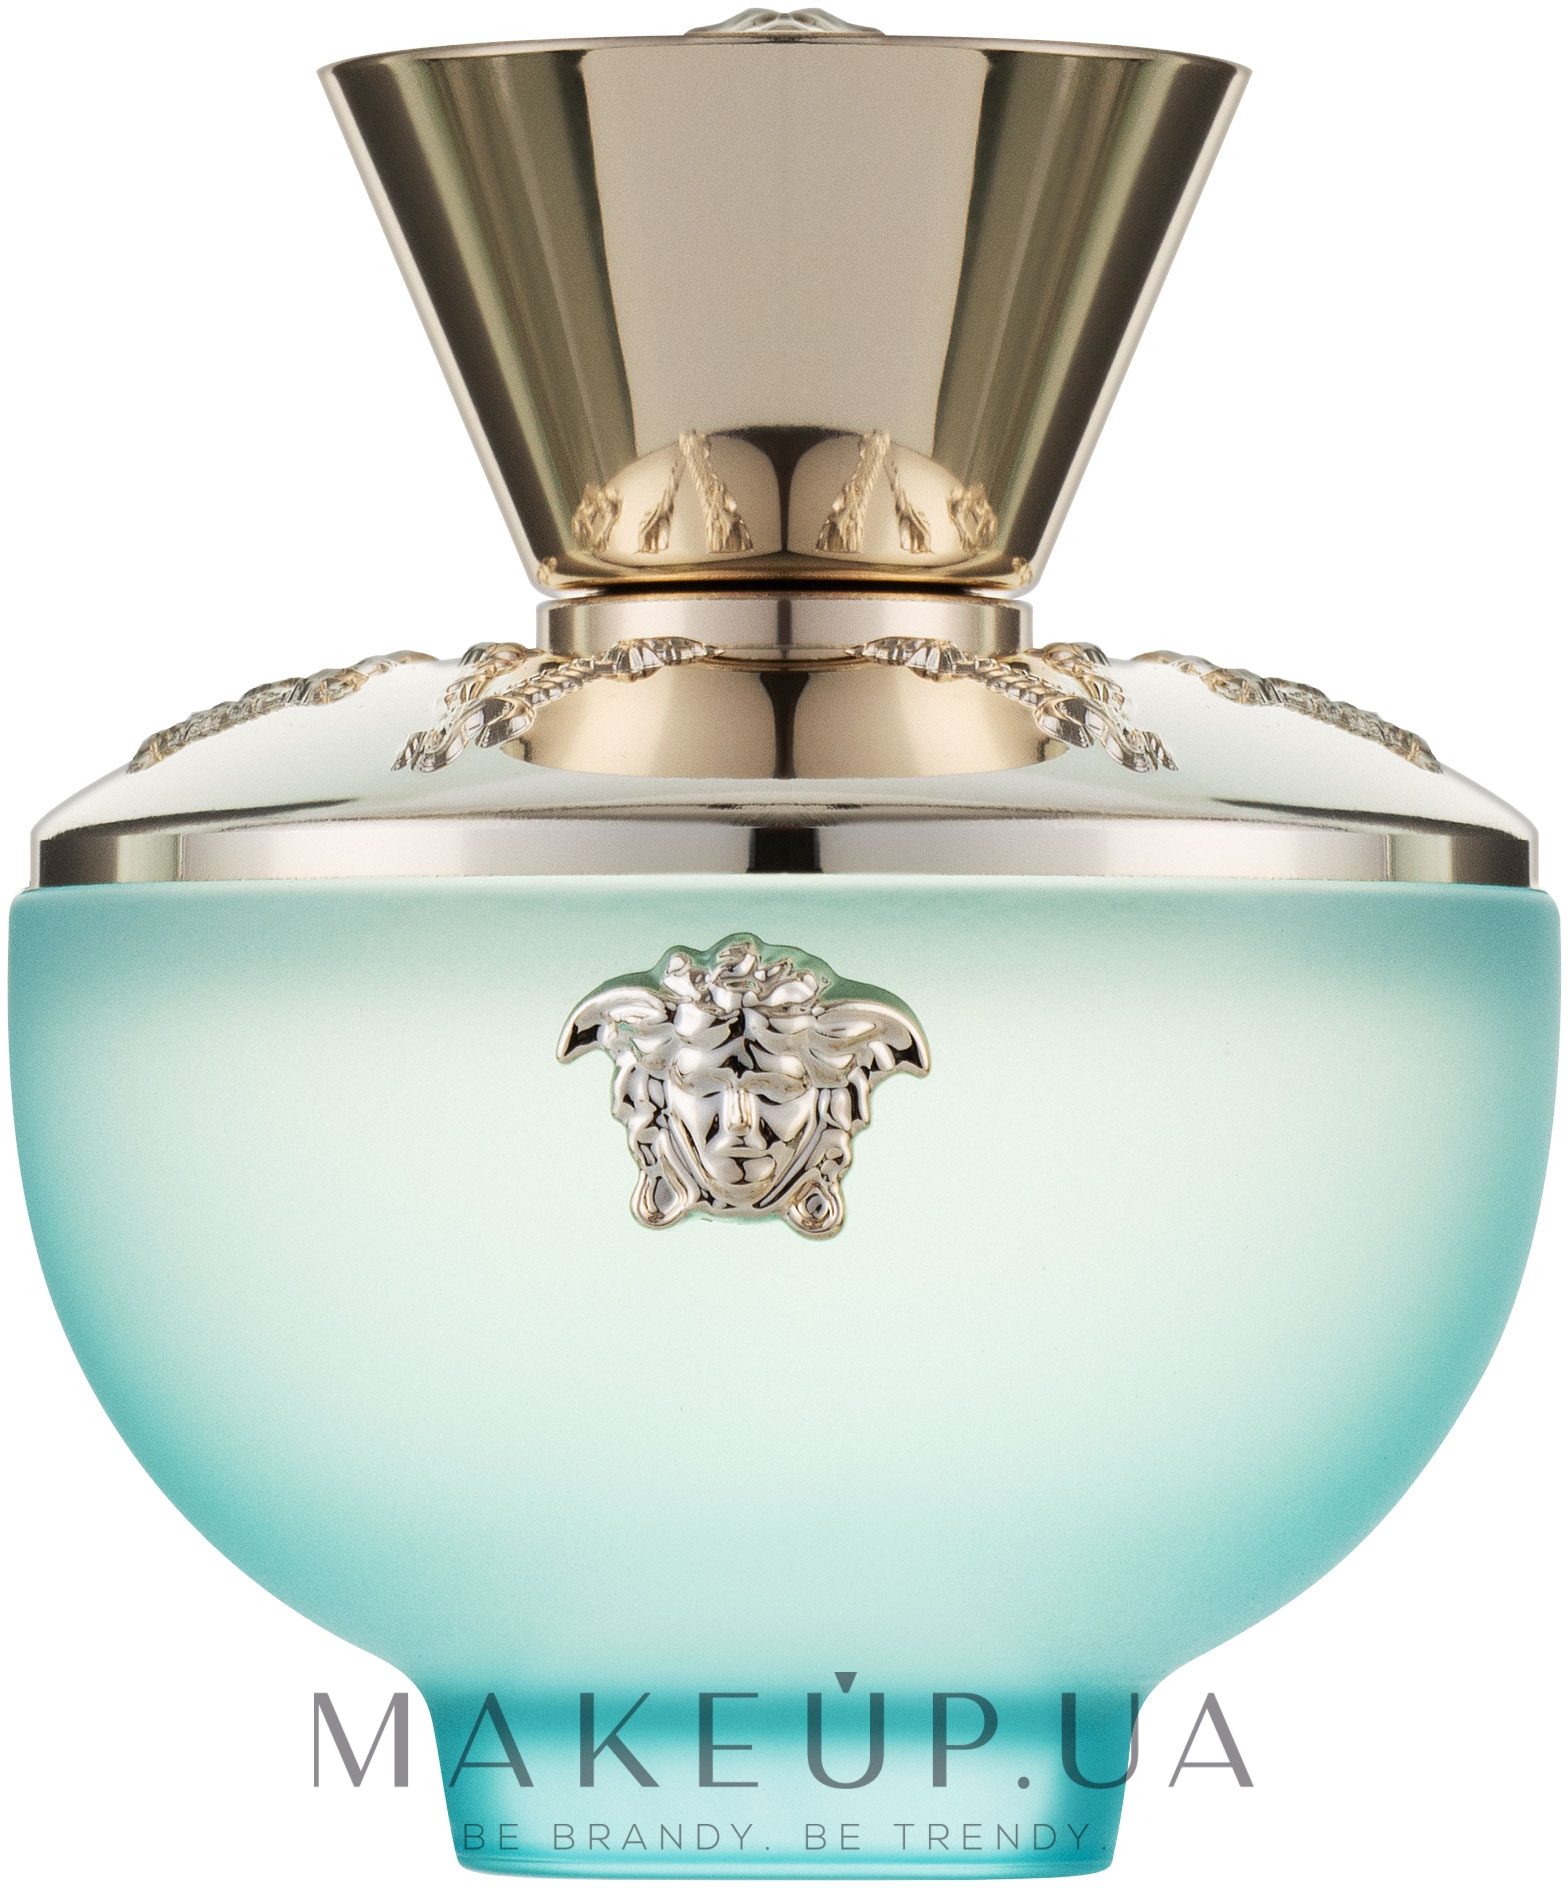 Versace Dylan Turquoise pour Femme